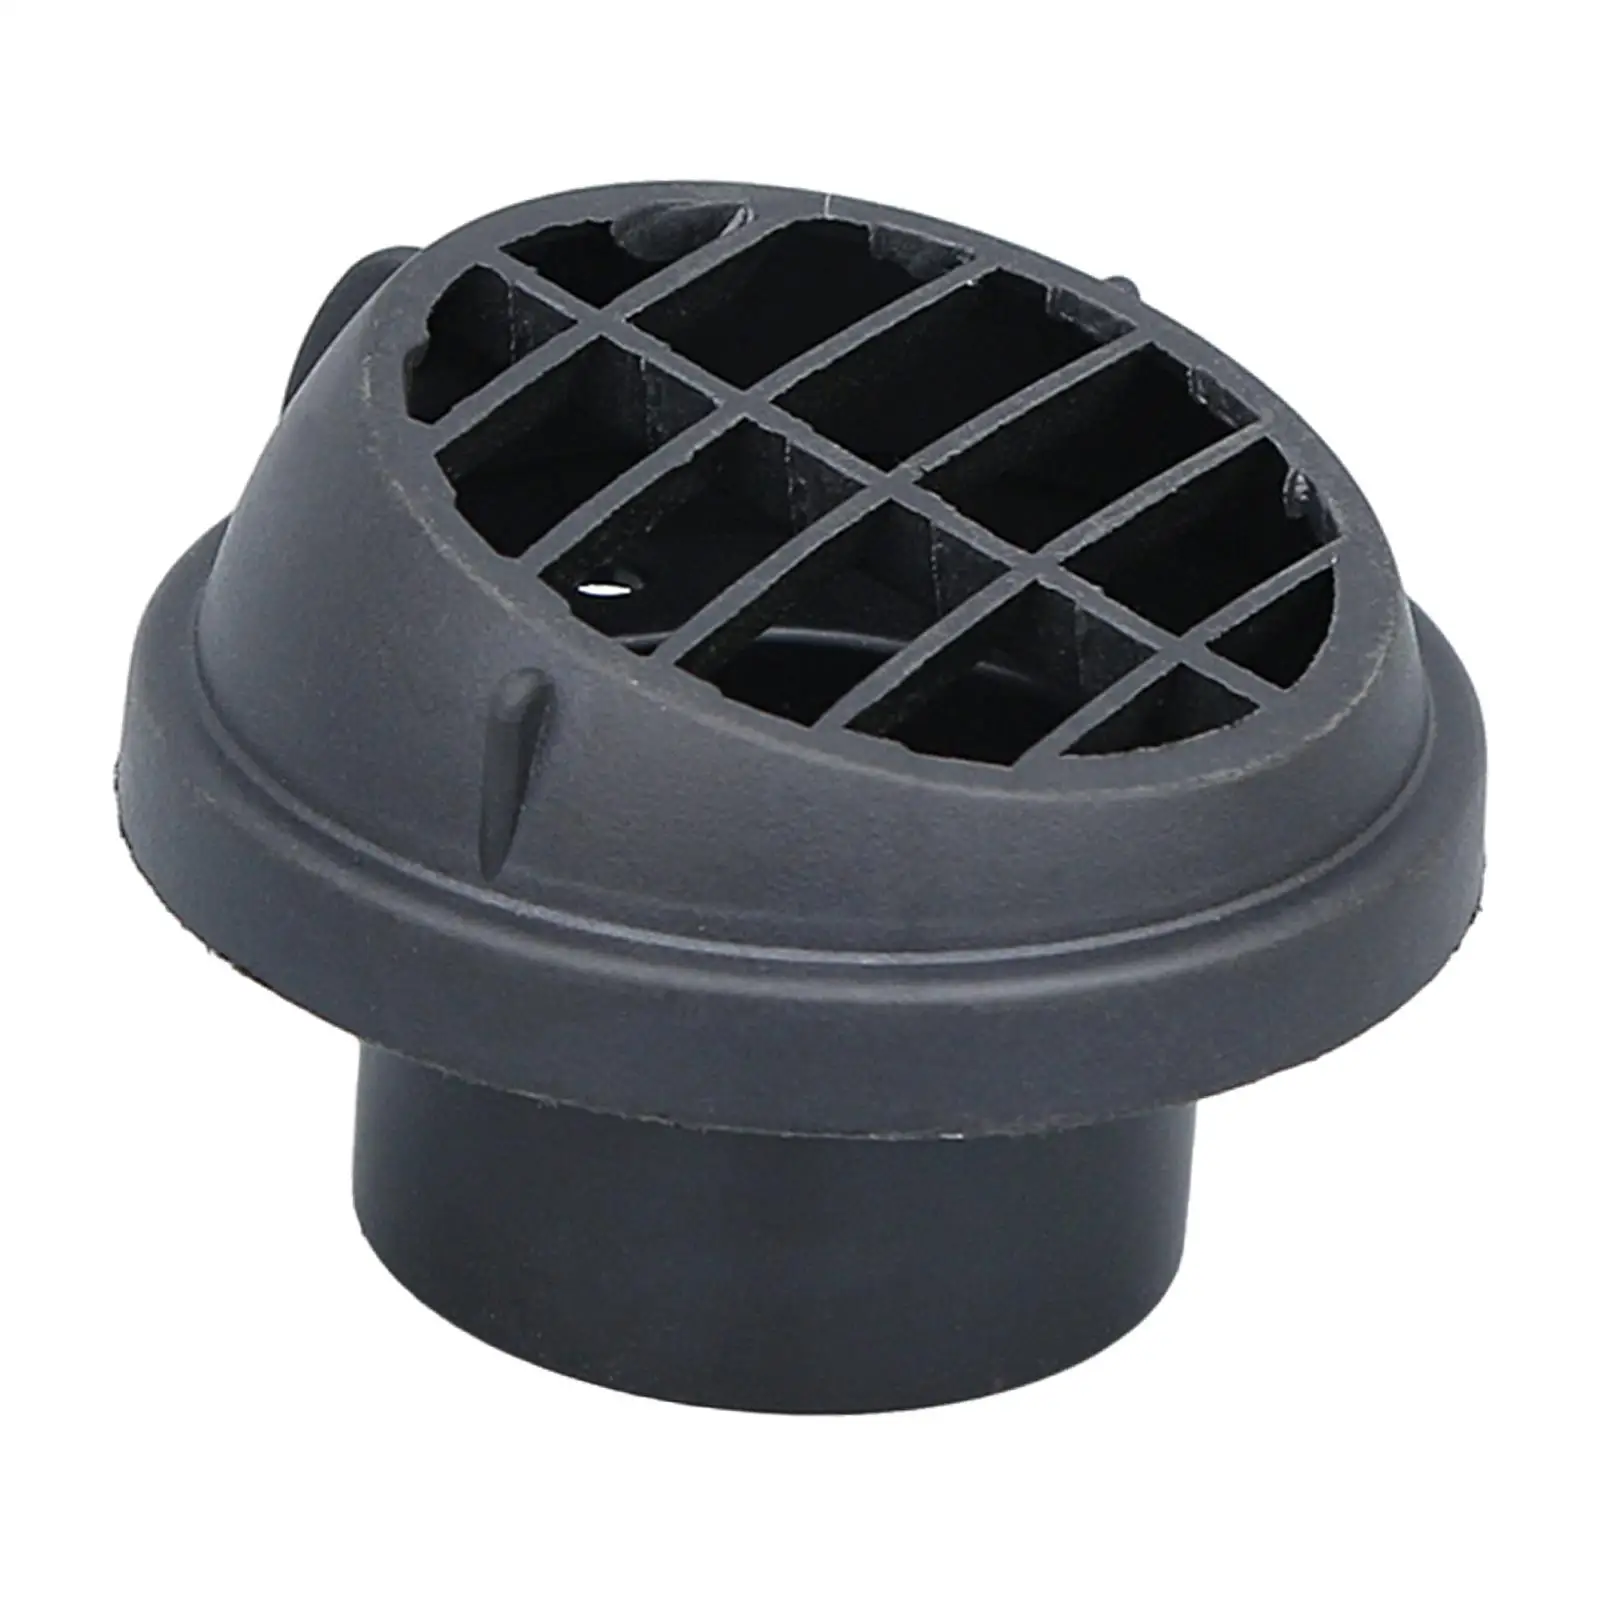 Car Heater Vent Outlet Heater Ducting Air Vent Car Heater Air Outlet for Automobile Automotive Car Vehicle Spare Parts